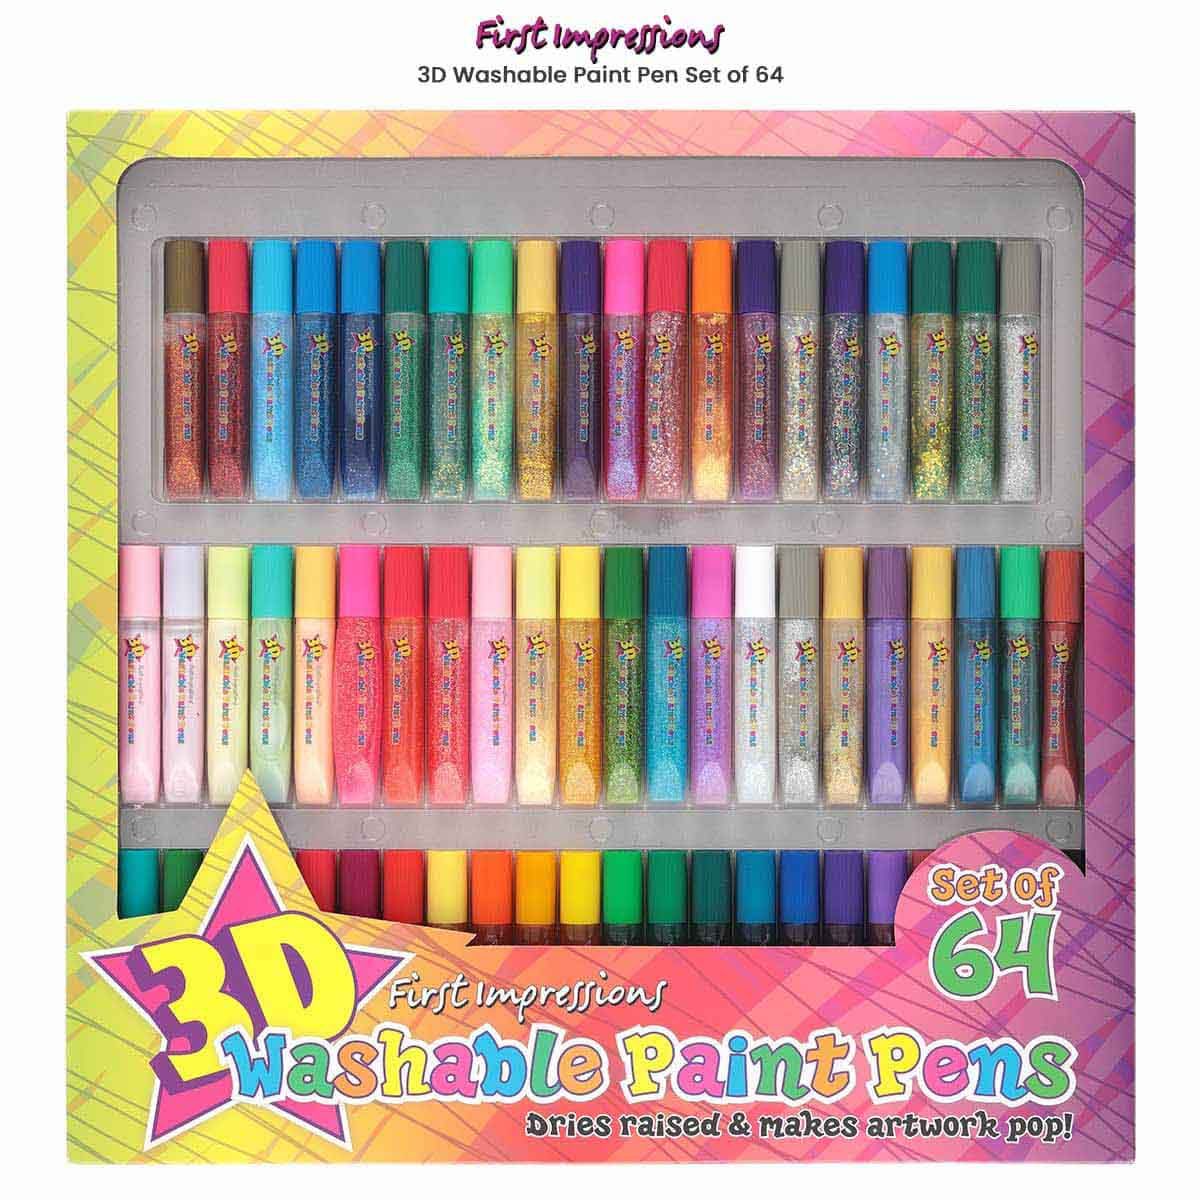 First Impressions 3D Washable Painting Glue Pen Set of 64